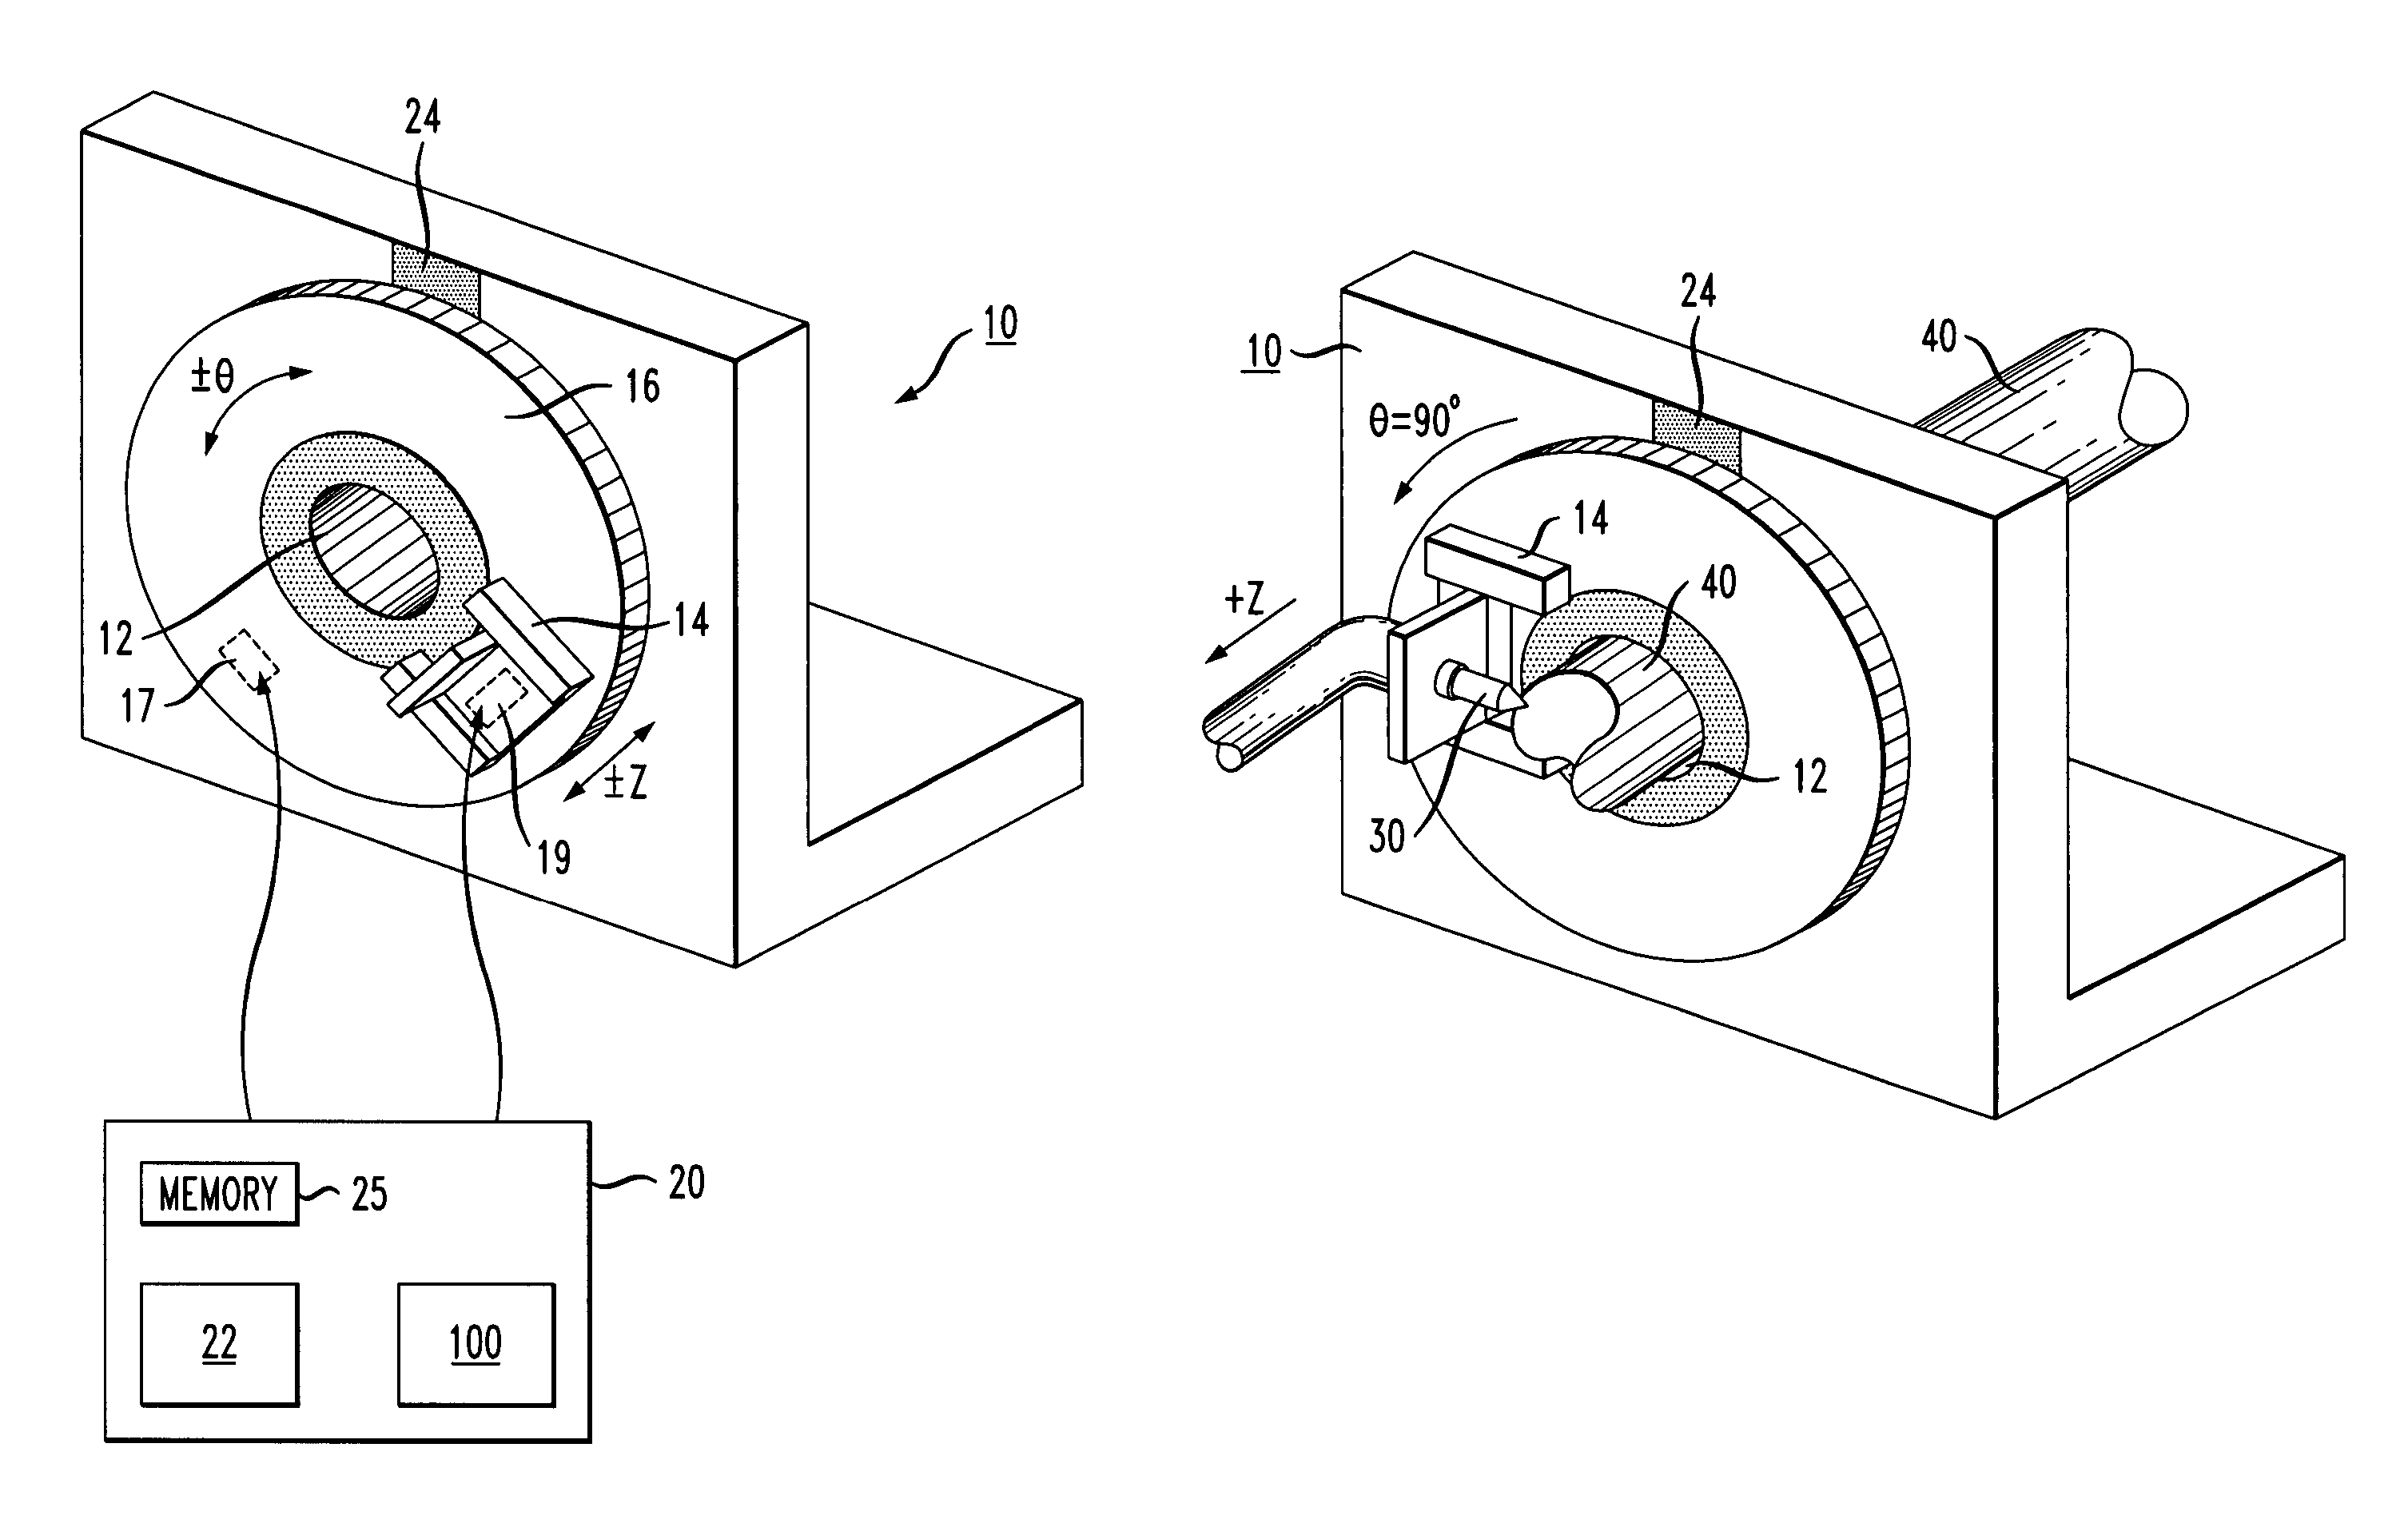 Pipe cutting apparatus and method of using the same